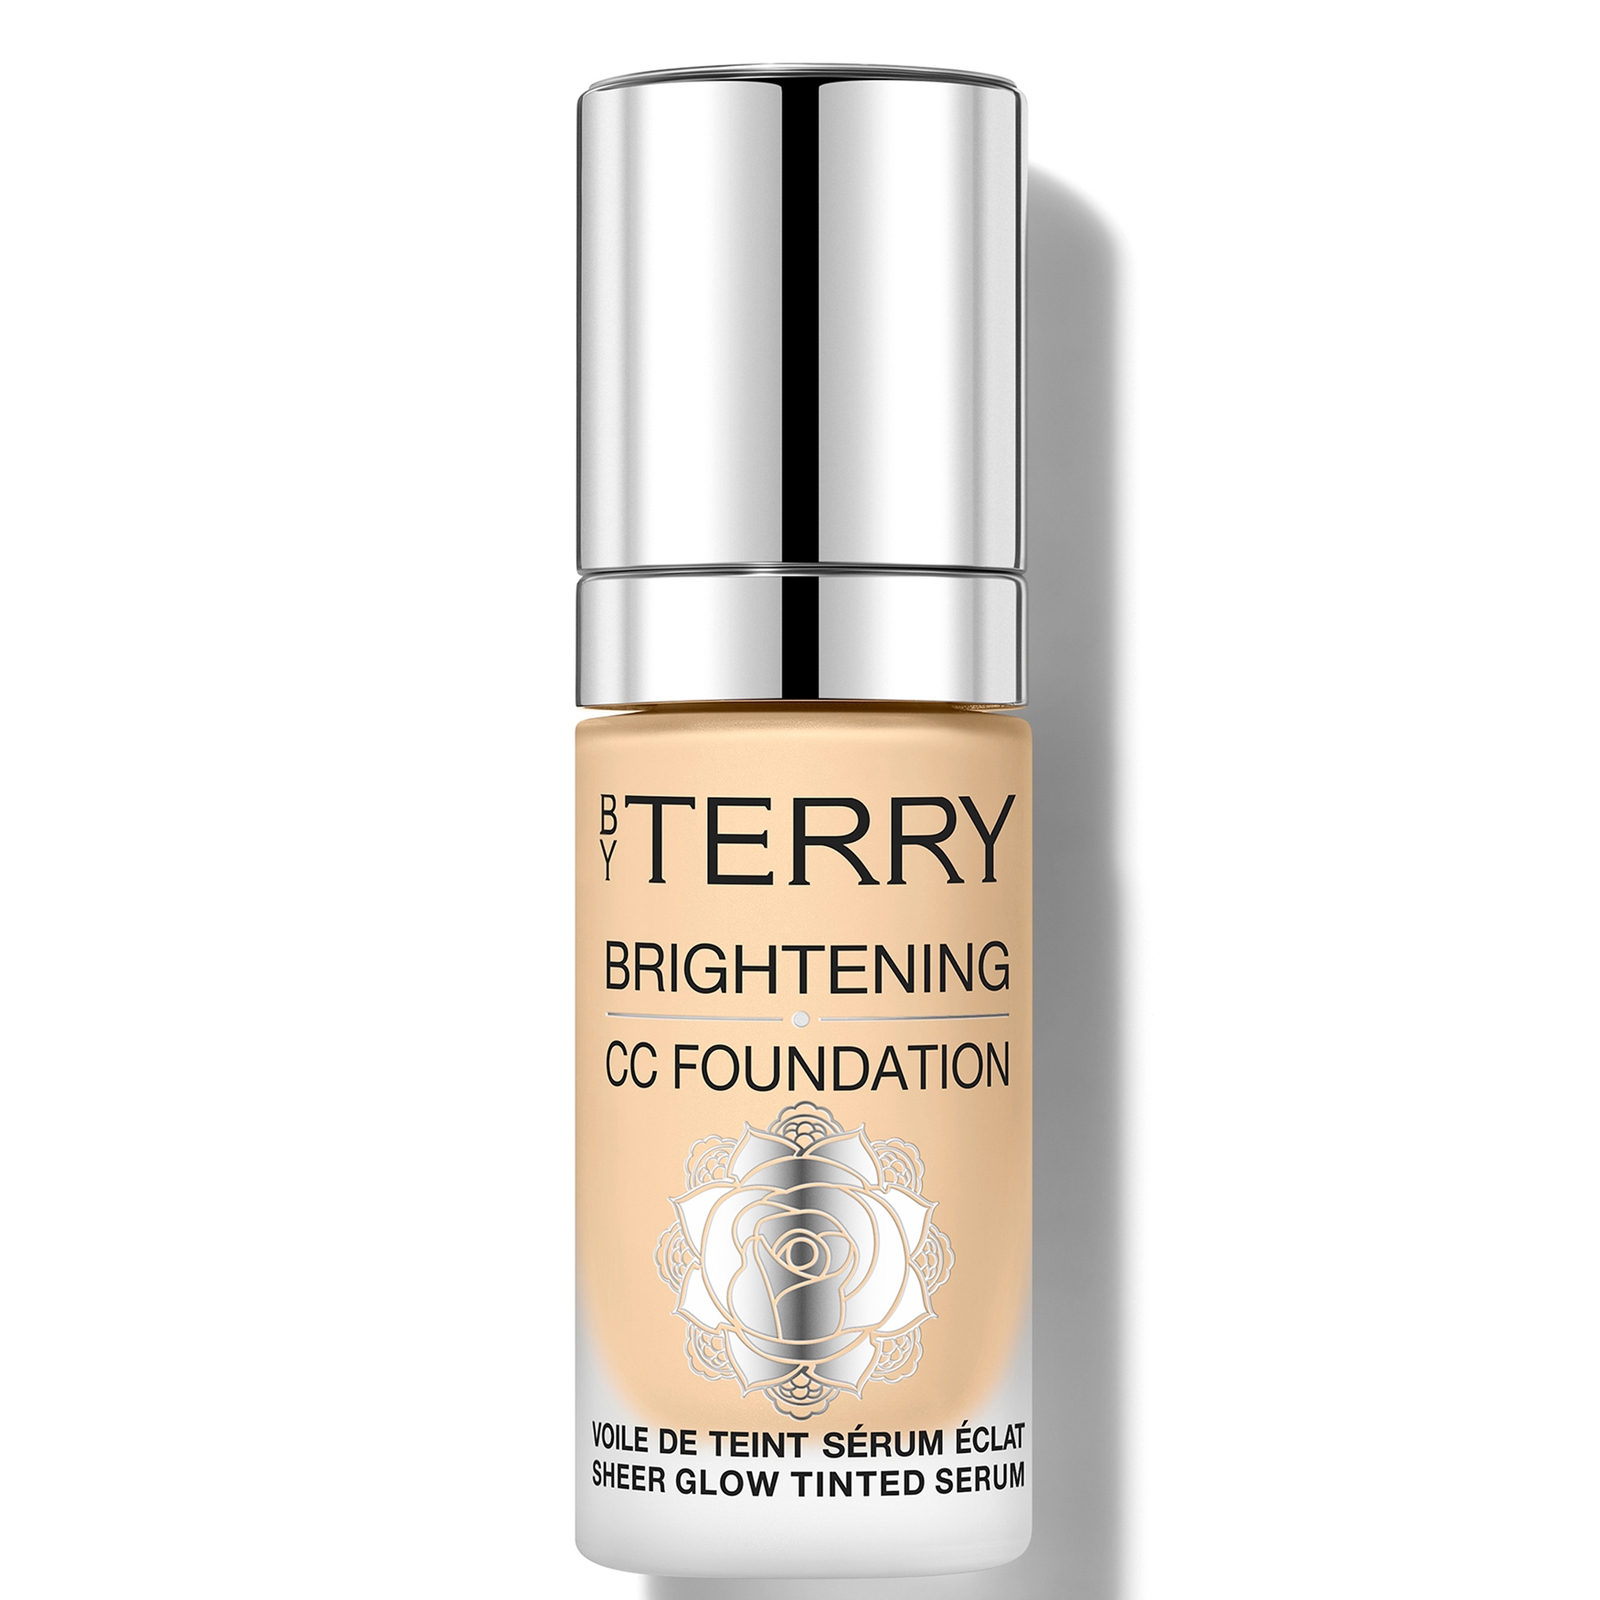 Image of By Terry Brightening CC Foundation 30ml (Various Shades) - 3W - MEDIUM LIGHT WARM